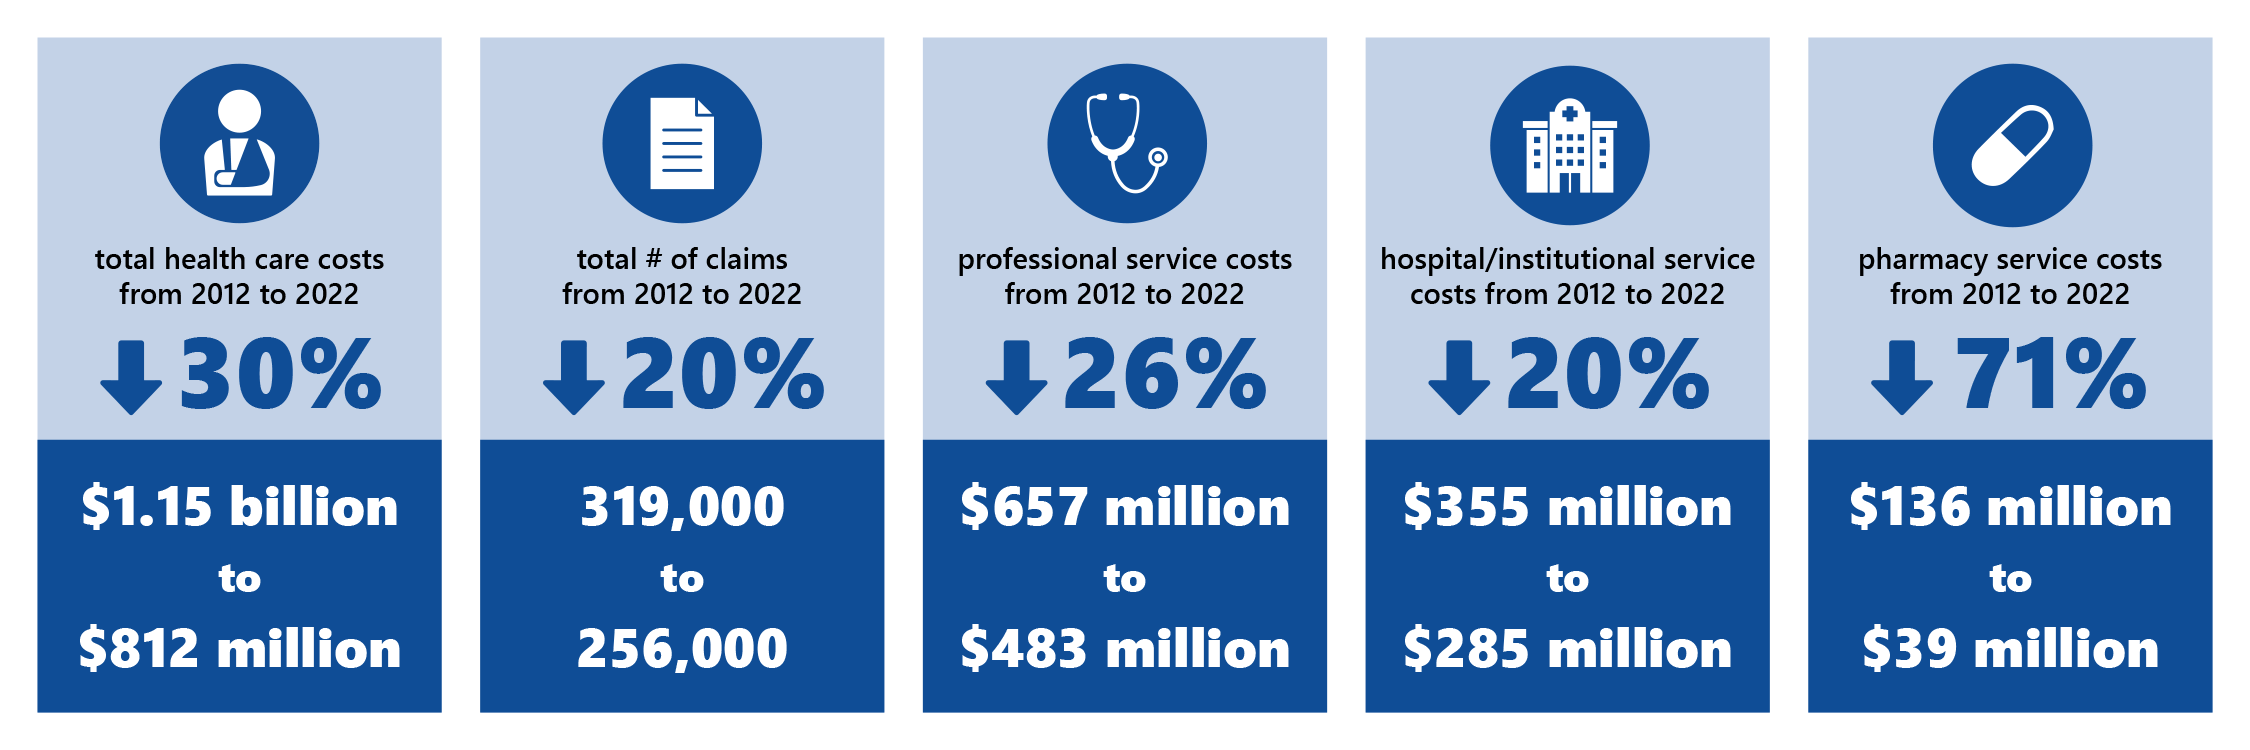 The total health care costs decreased 30%, from $1.15 billion in 2012 to $812 million in 2022.  The total number of claims decreased 20%, from 319,000 in 2012 to 256,000 in 2022.  The total cost of professional services decreased 26%, from $657 million in 2012 to $483 million in 2022.  The total cost of hospital and institutional services decreased 20%, from $355 million in 2012 to $285 million in 2022.  The total cost of pharmacy services decreased 71%, from $136 million in 2012 to $39 million in 2022.